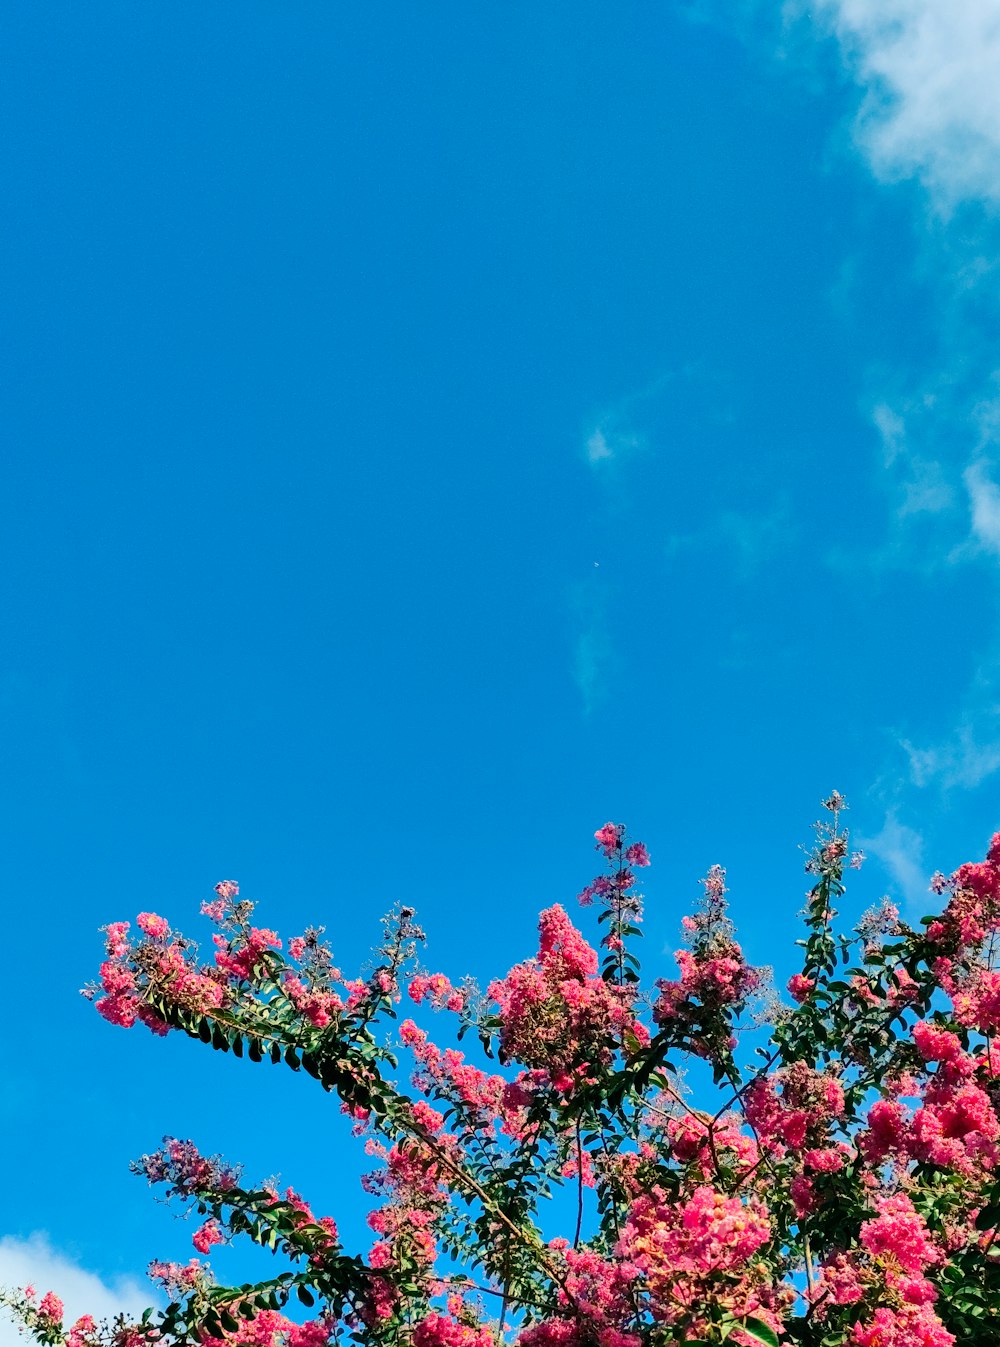 a blue sky with pink flowers in the foreground